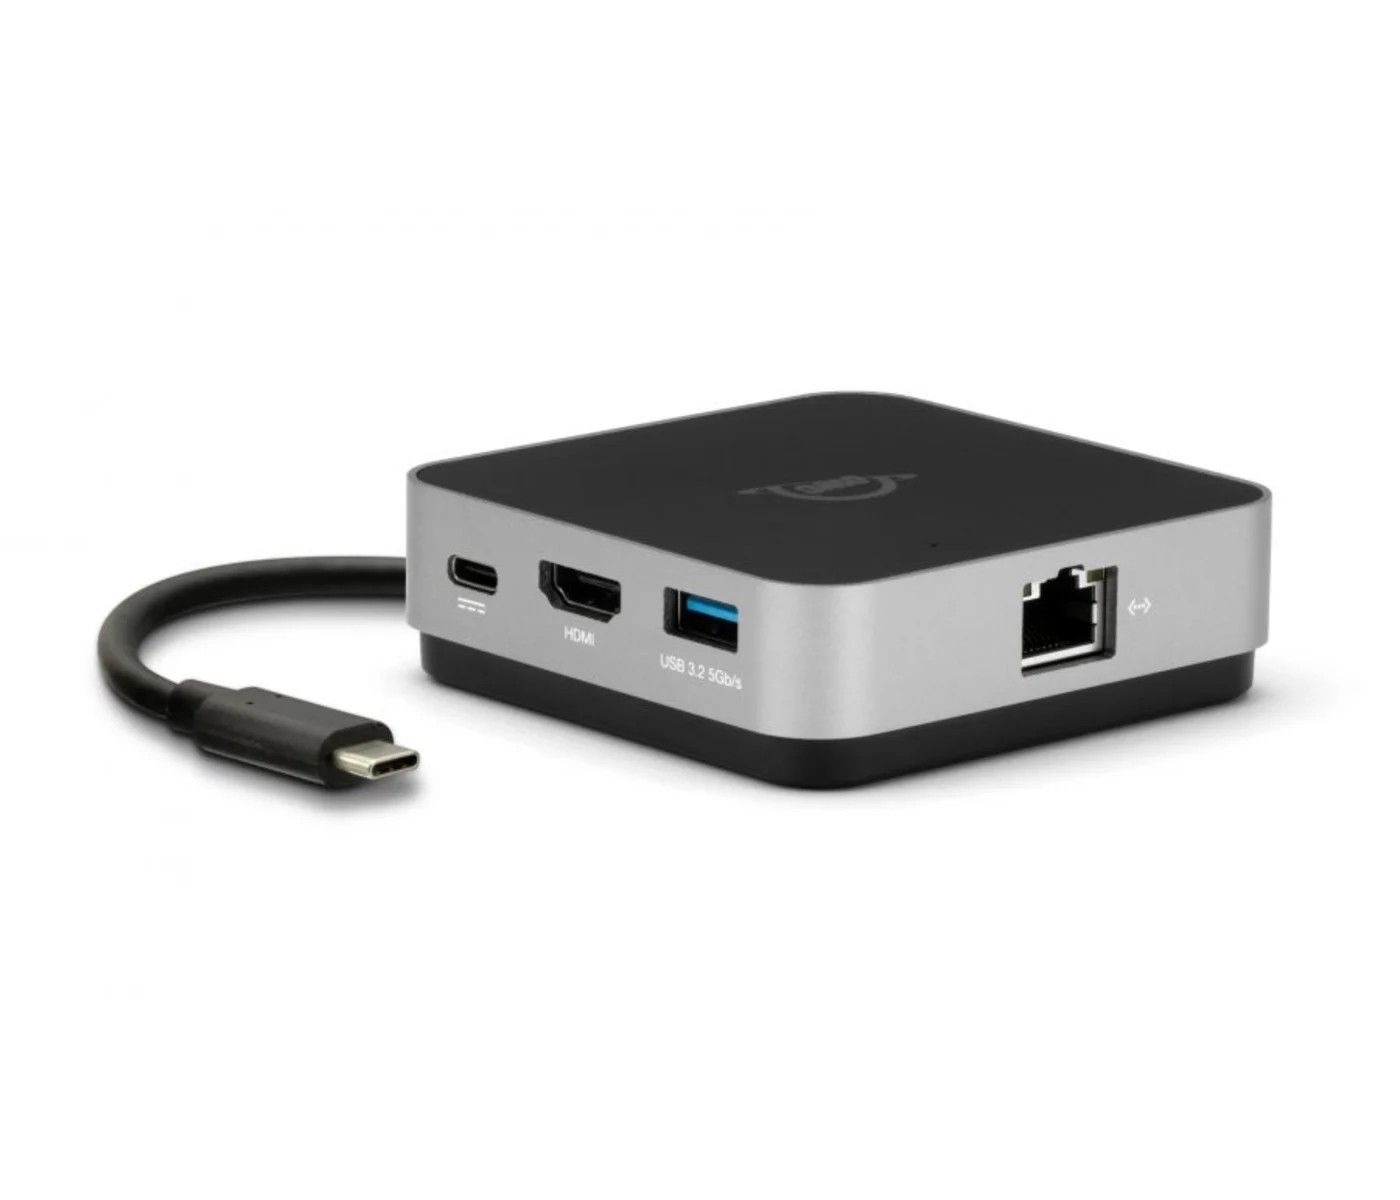 Plugable UD-6950PDH USB-C Dual 4K dock review: Reasonably priced